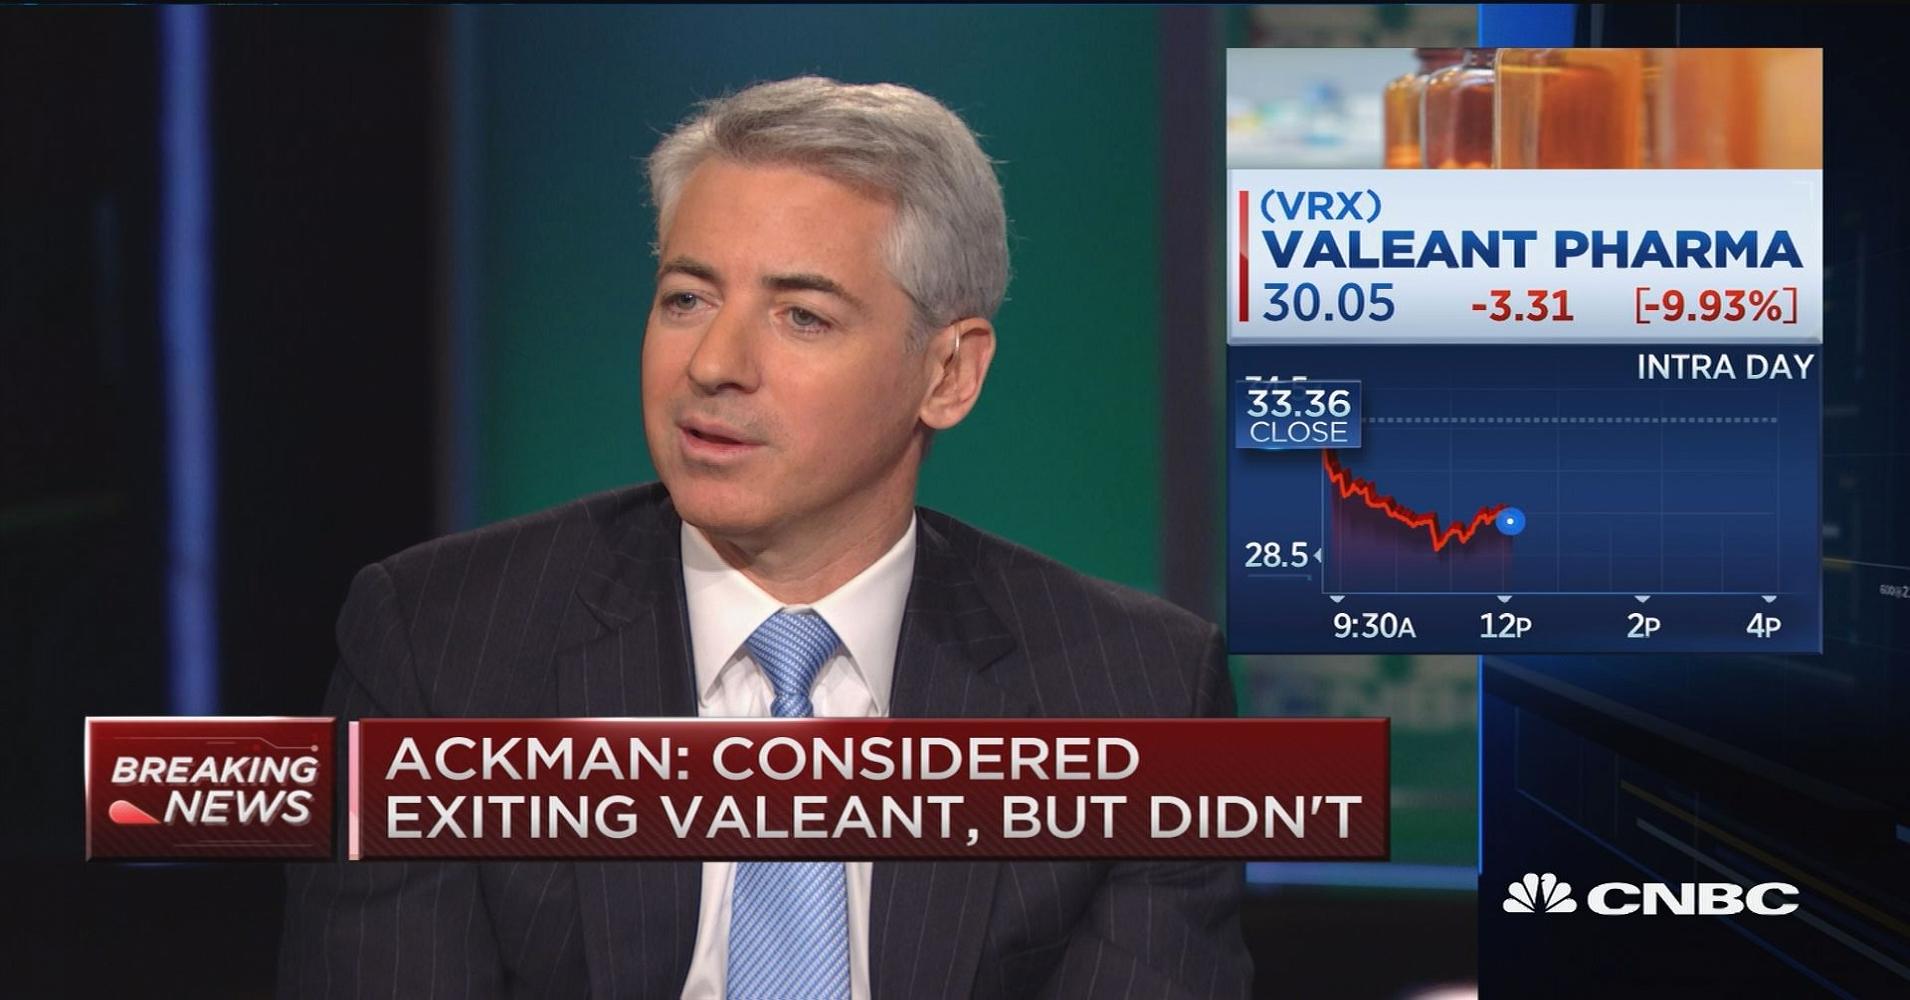 Andrew Left has the last laugh at Bill Ackman (Valeant)